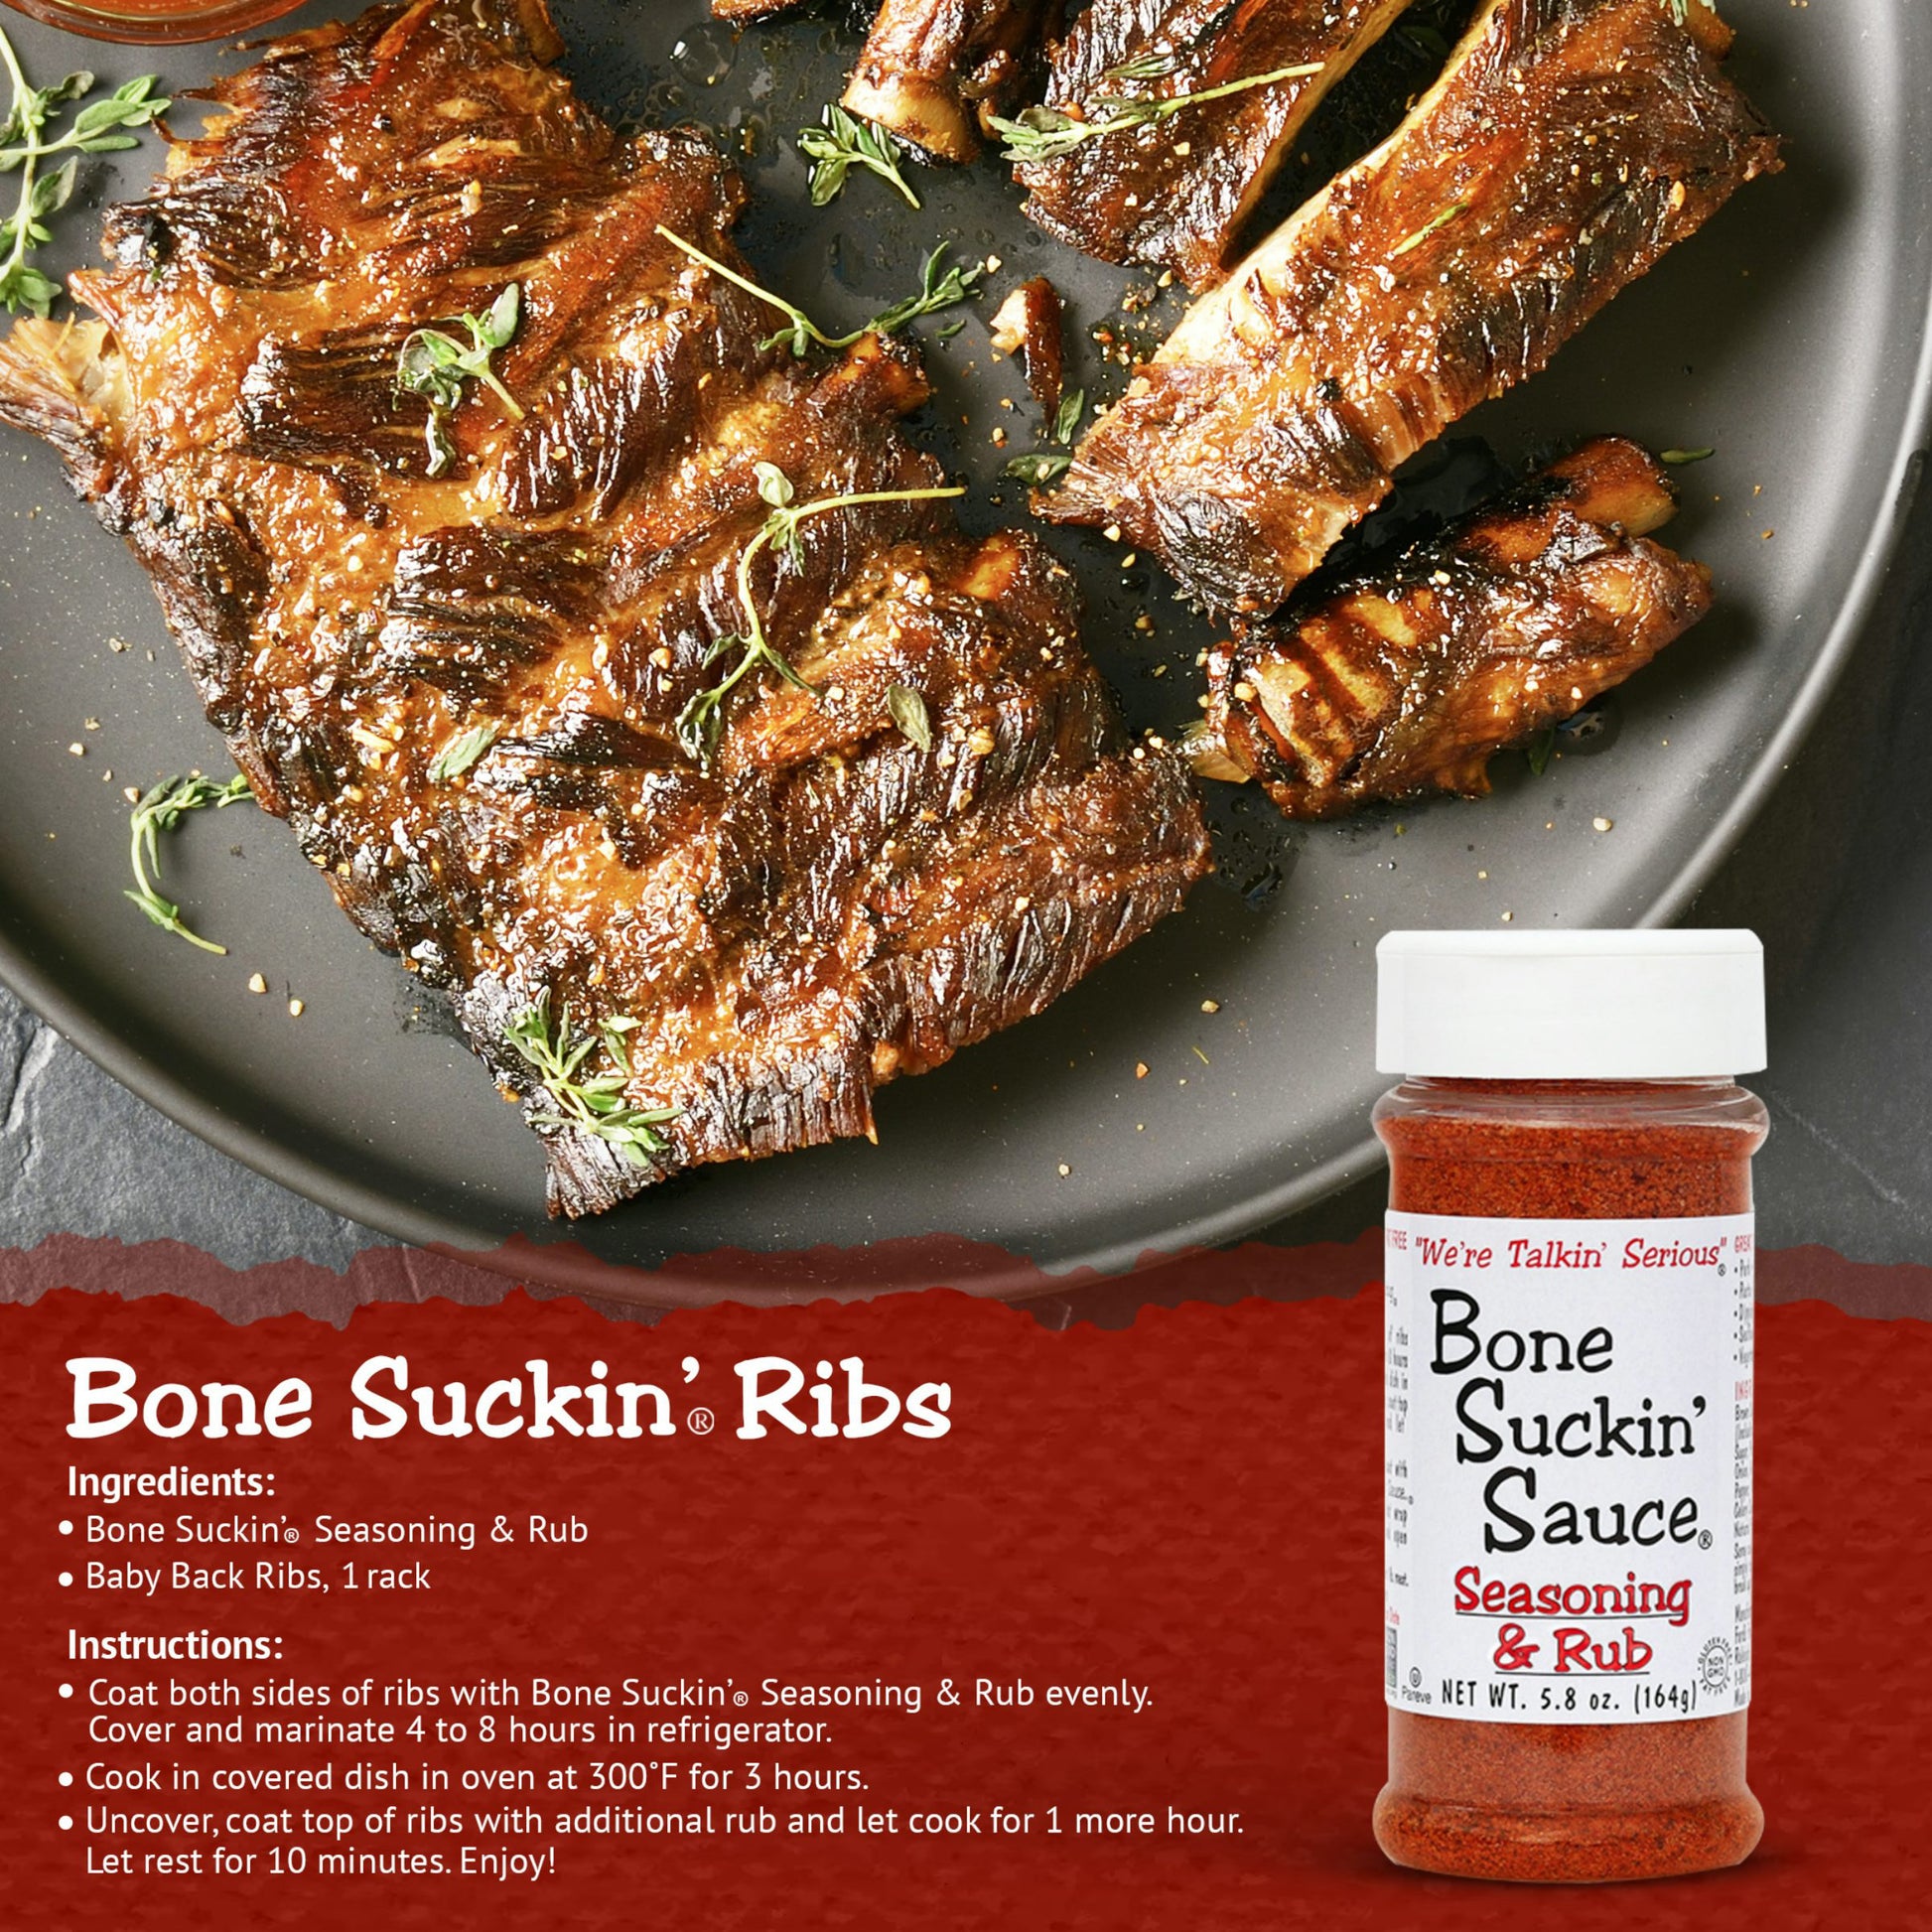 Bone Suckin' Ribs Recipe. Ingredients: Bone Suckin' Seasoning & Rub. Baby Back Ribs, 1 rack. Instructions: Coat both sides of ribs with Bone Suckin' Seasoning & Rub evenly. Cover and marinate 4 to 8 hours in refrigerator. Cook in covered dish in oven at 300 F for 3 hours. Uncover, coat top of ribs with additional rub and let cook for 1 more hour. Let rest for 10 minutes. Enjoy! Optional: For wet ribs, during last hour coat with favorite flavor of Bone Suckin' Sauce.